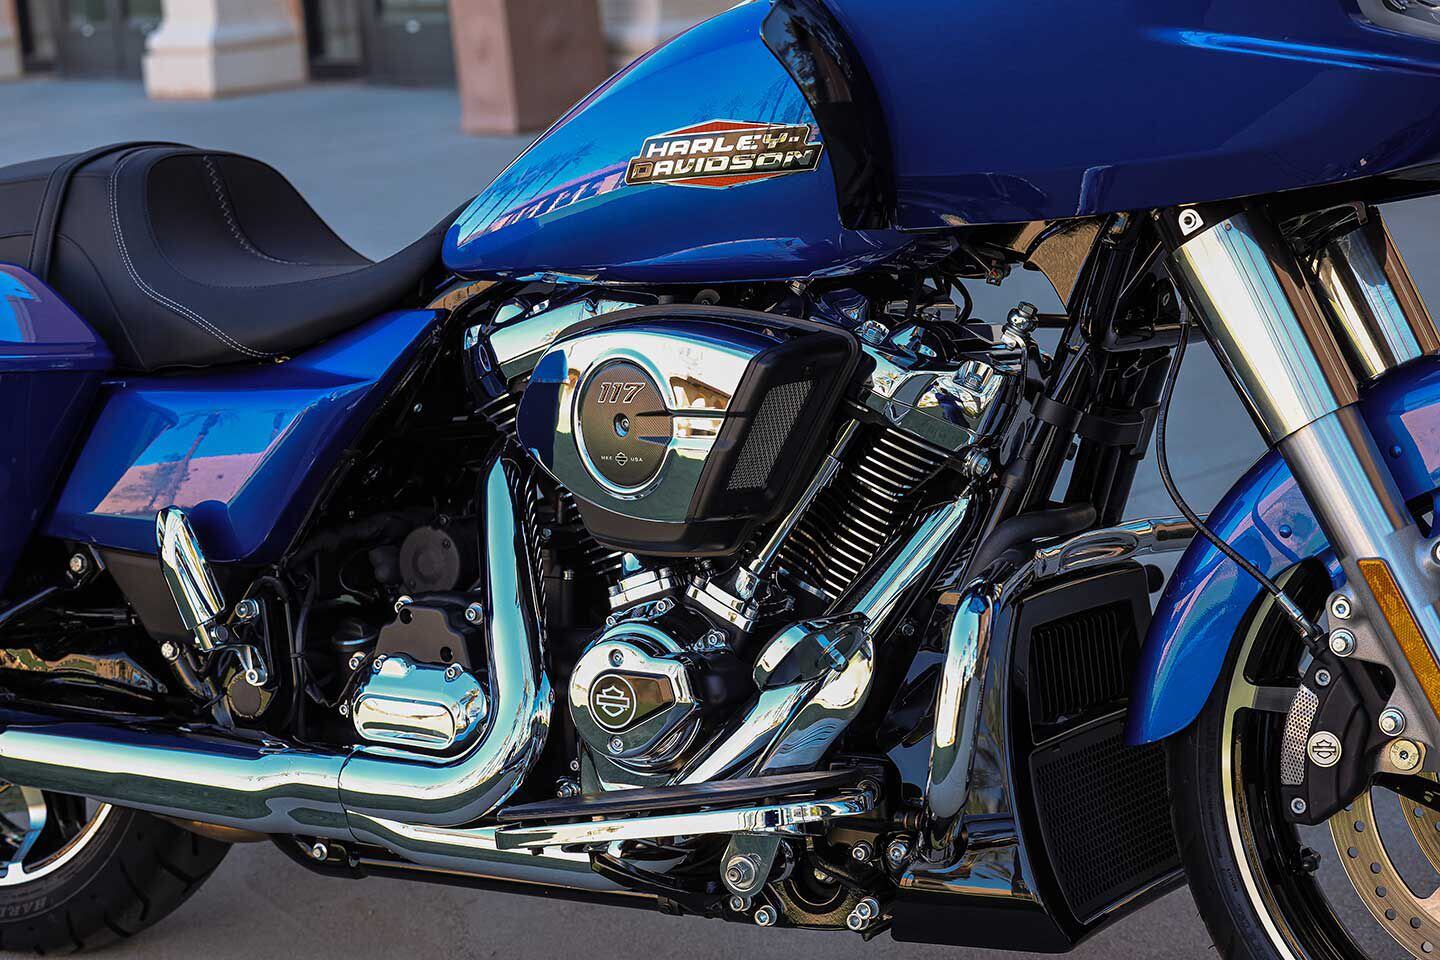 The 2024 Harley-Davidson Road Glide is powered by an improved 117ci V-twin that’s good for 105 hp (claimed).